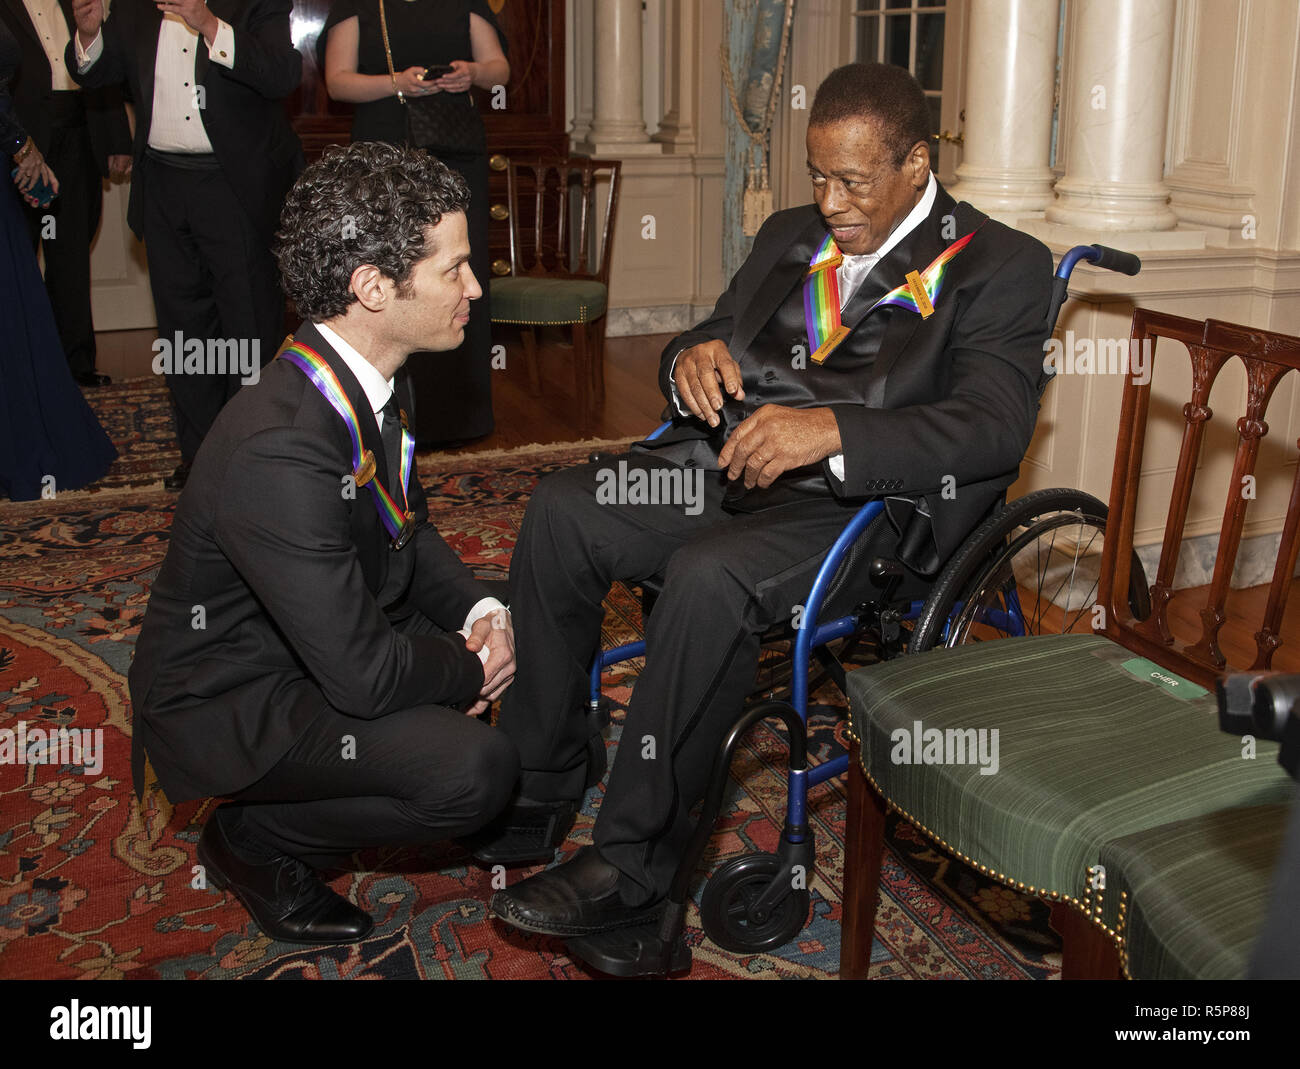 December 1, 2018 - Washington, District of Columbia, U.S. - Thomas Kail, left, and wayne Shorter, right, two of the recipients of the 41st Annual Kennedy Center Honors, converse after posing for a group photo following a dinner hosted by United States Deputy Secretary of State John J. Sullivan in their honor at the US Department of State in Washington, DC on Saturday, December 1, 2018. The 2018 honorees are: singer and actress Cher; composer and pianist Philip Glass; Country music entertainer Reba McEntire; and jazz saxophonist and composer Wayne Shorter. This year, the co-creators of Hamil Stock Photo